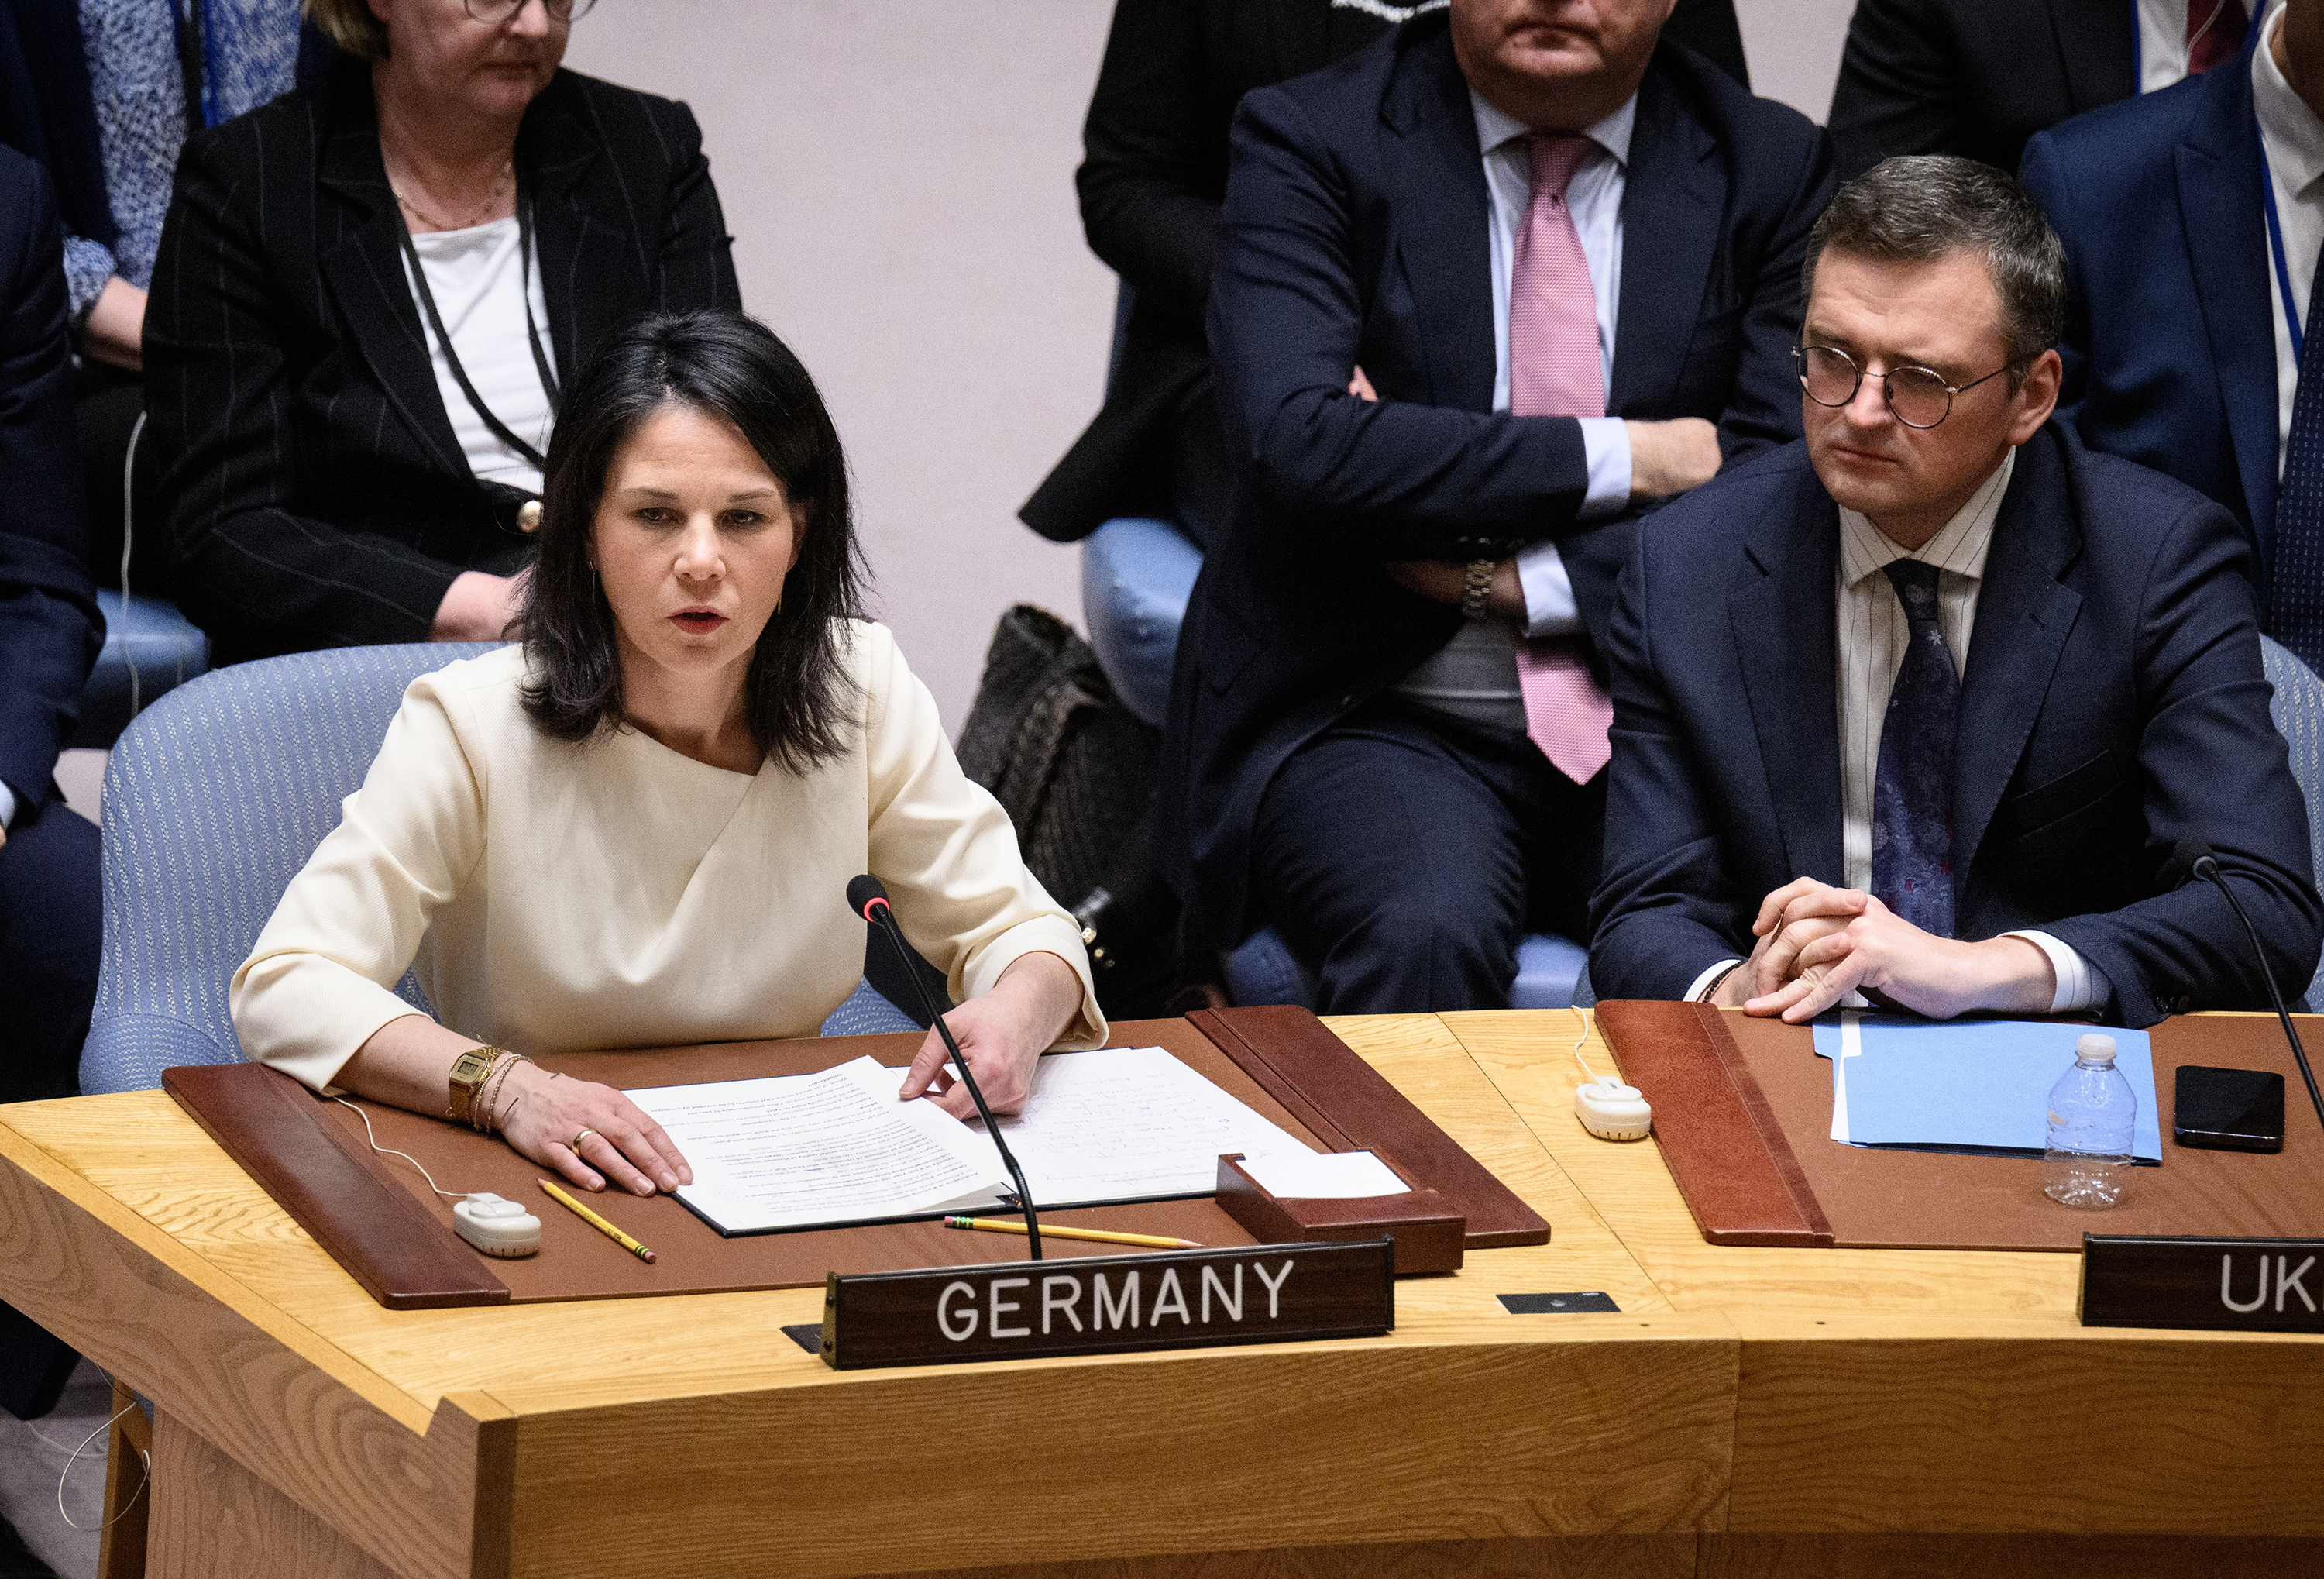 German Foreign Minister Annalena Baerbock speaks at the special session of the United Nations Security Council on maintaining peace and security in Ukraine on February 23, in New York.